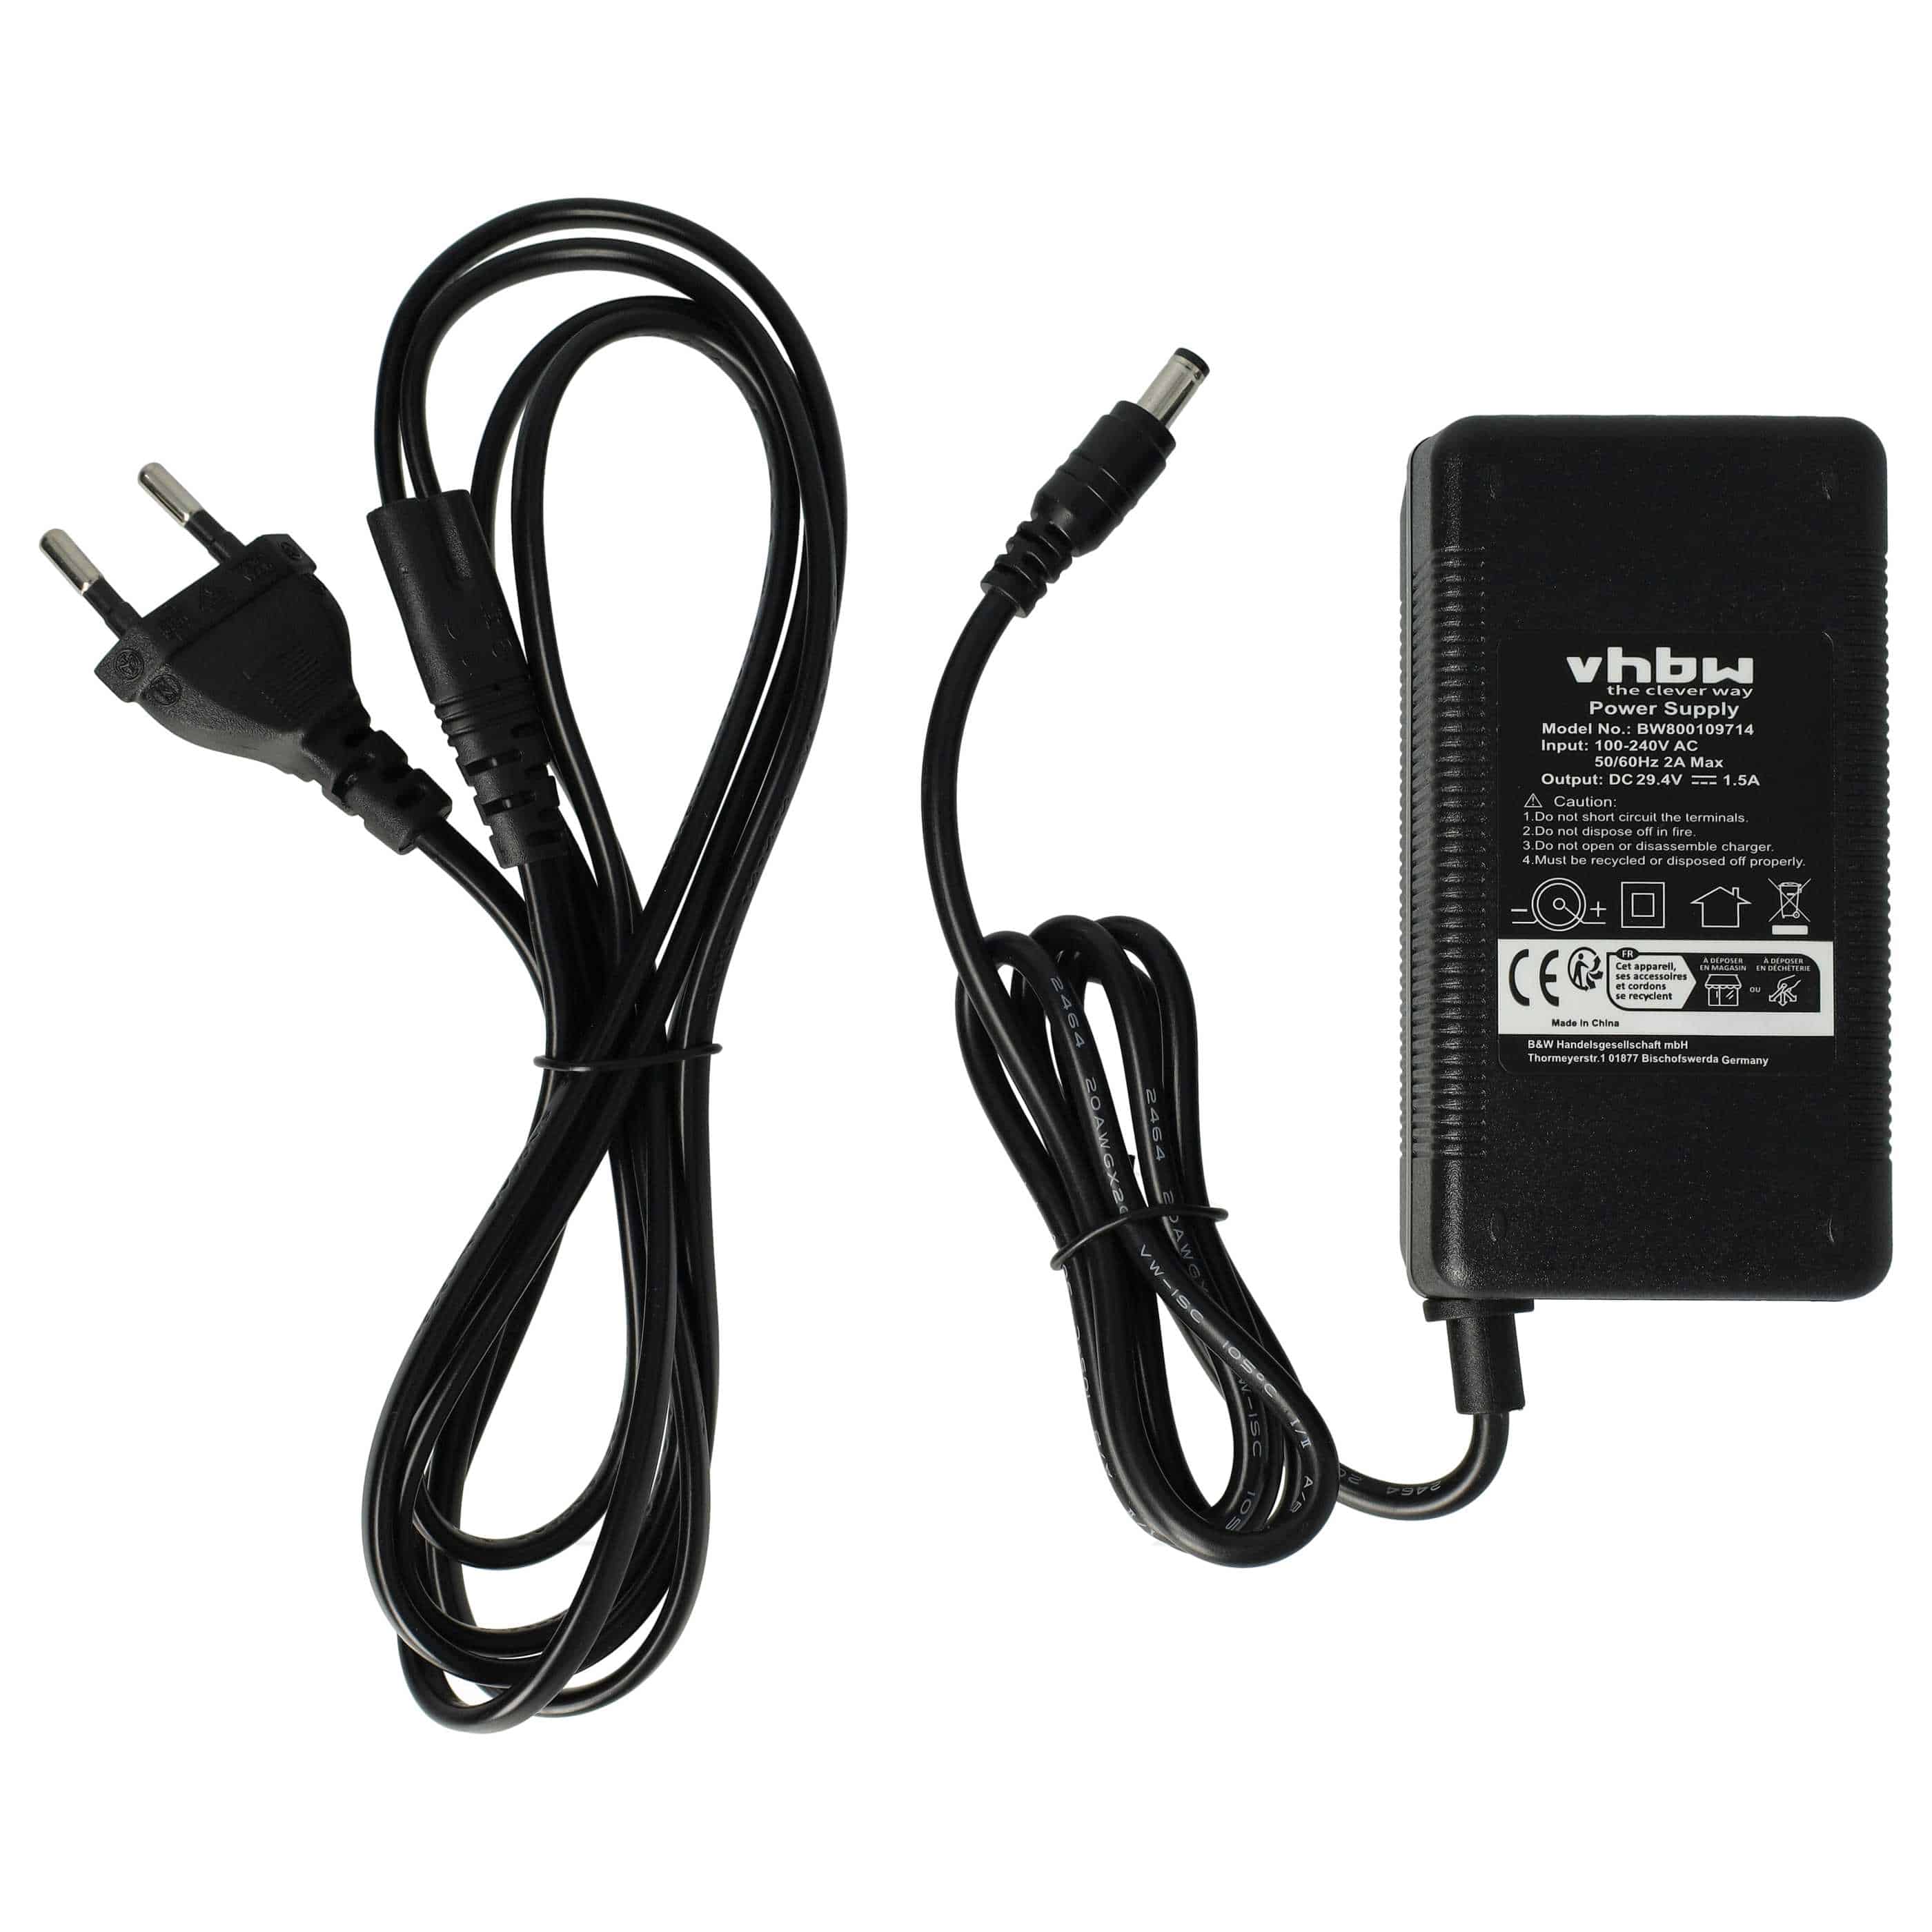 Charger suitable for E-Bike Battery - For 24 V Batteries, With Round Plug, 1.5 A